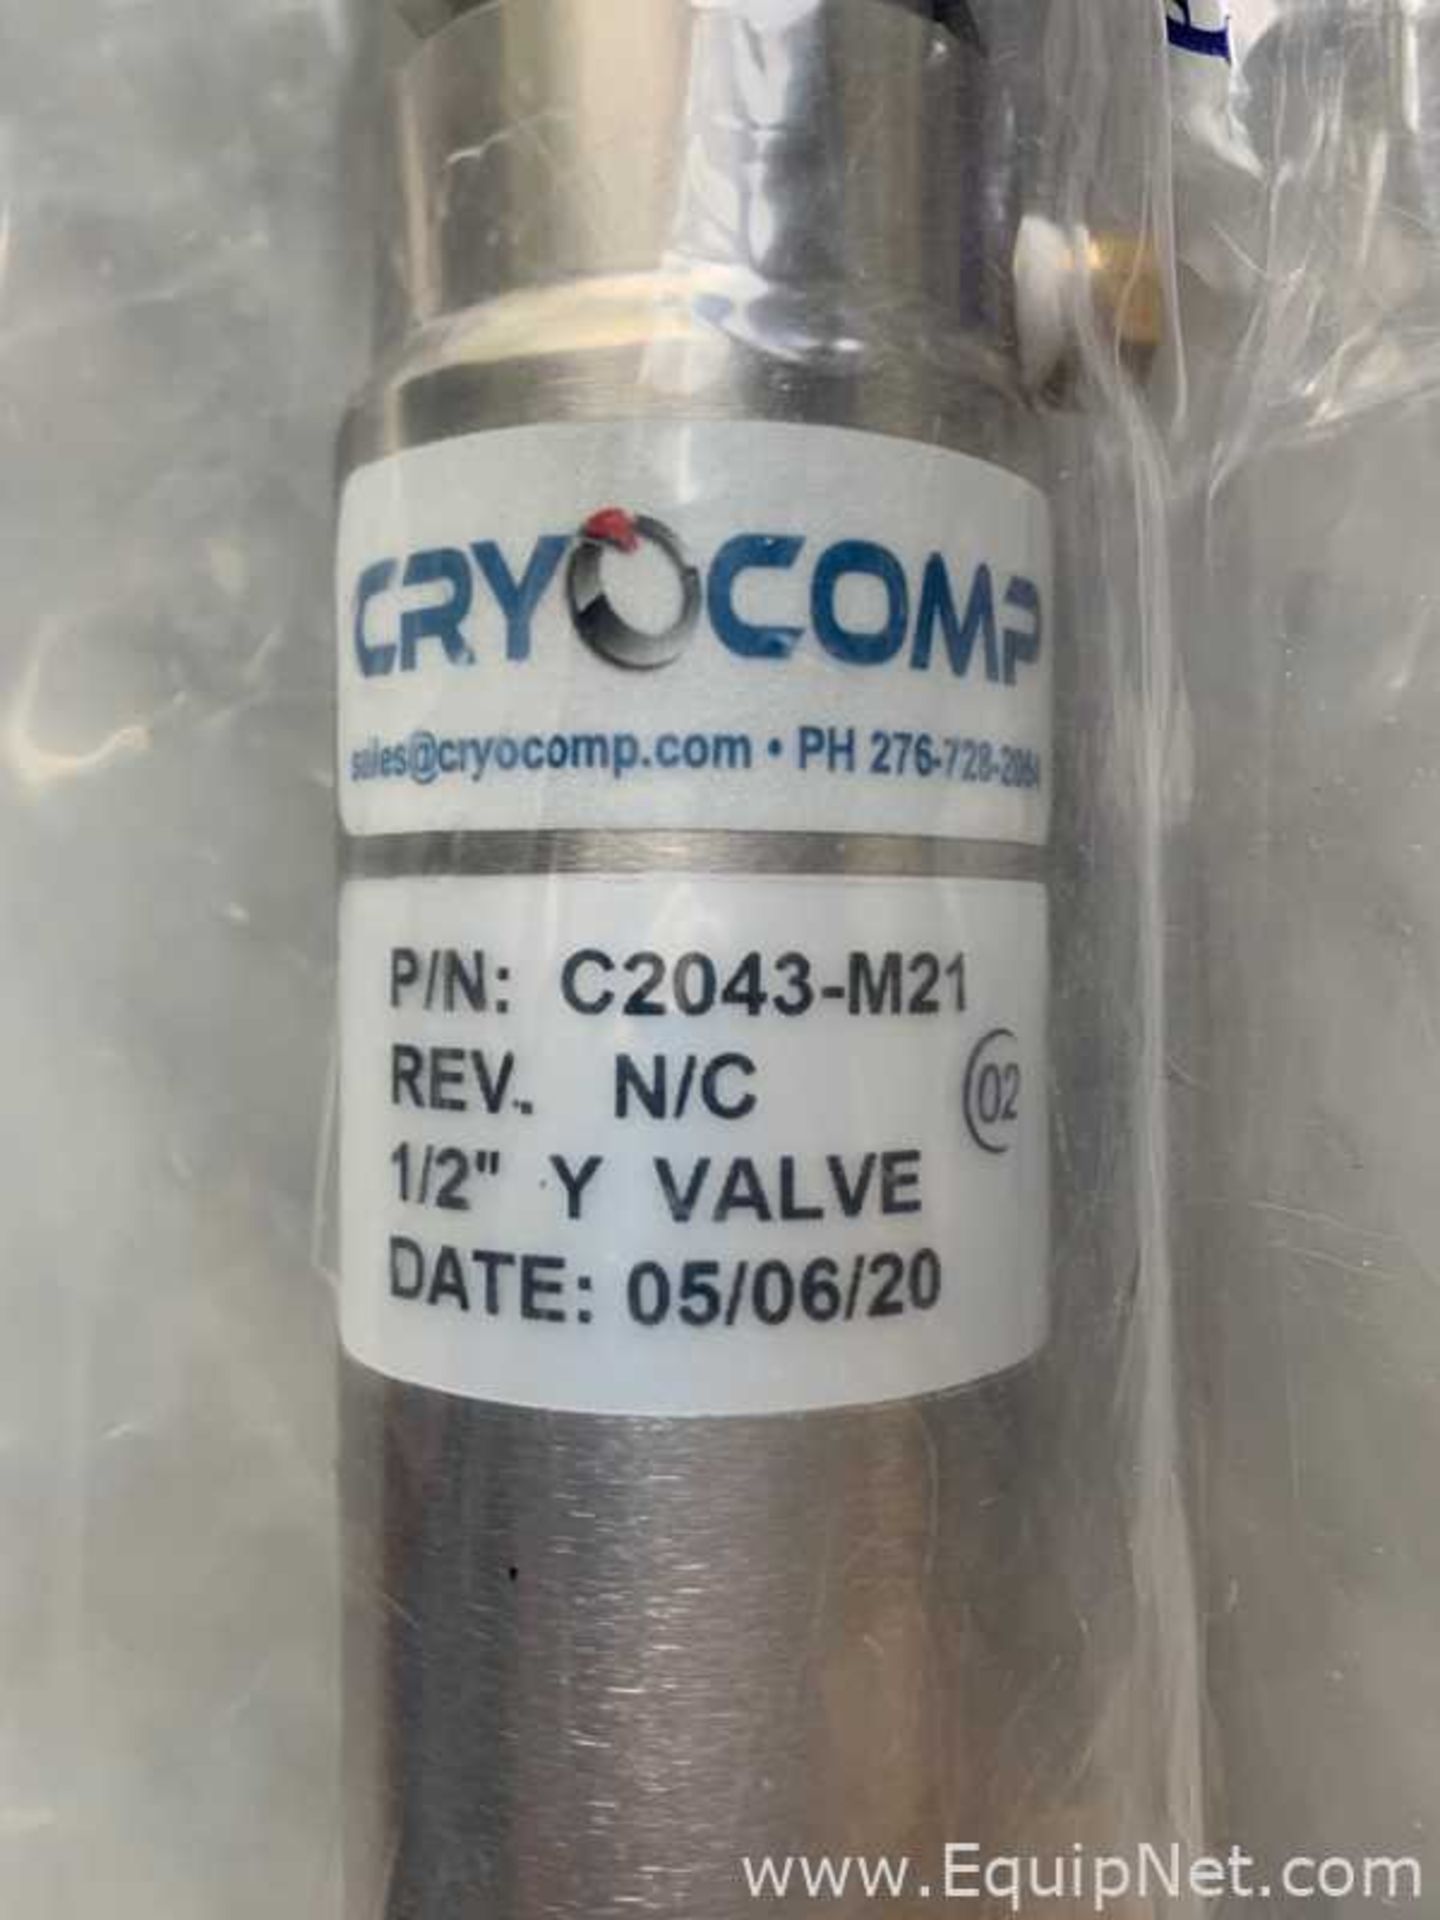 Lot of 15 CryComp C2403-M21 Valves - Image 4 of 5